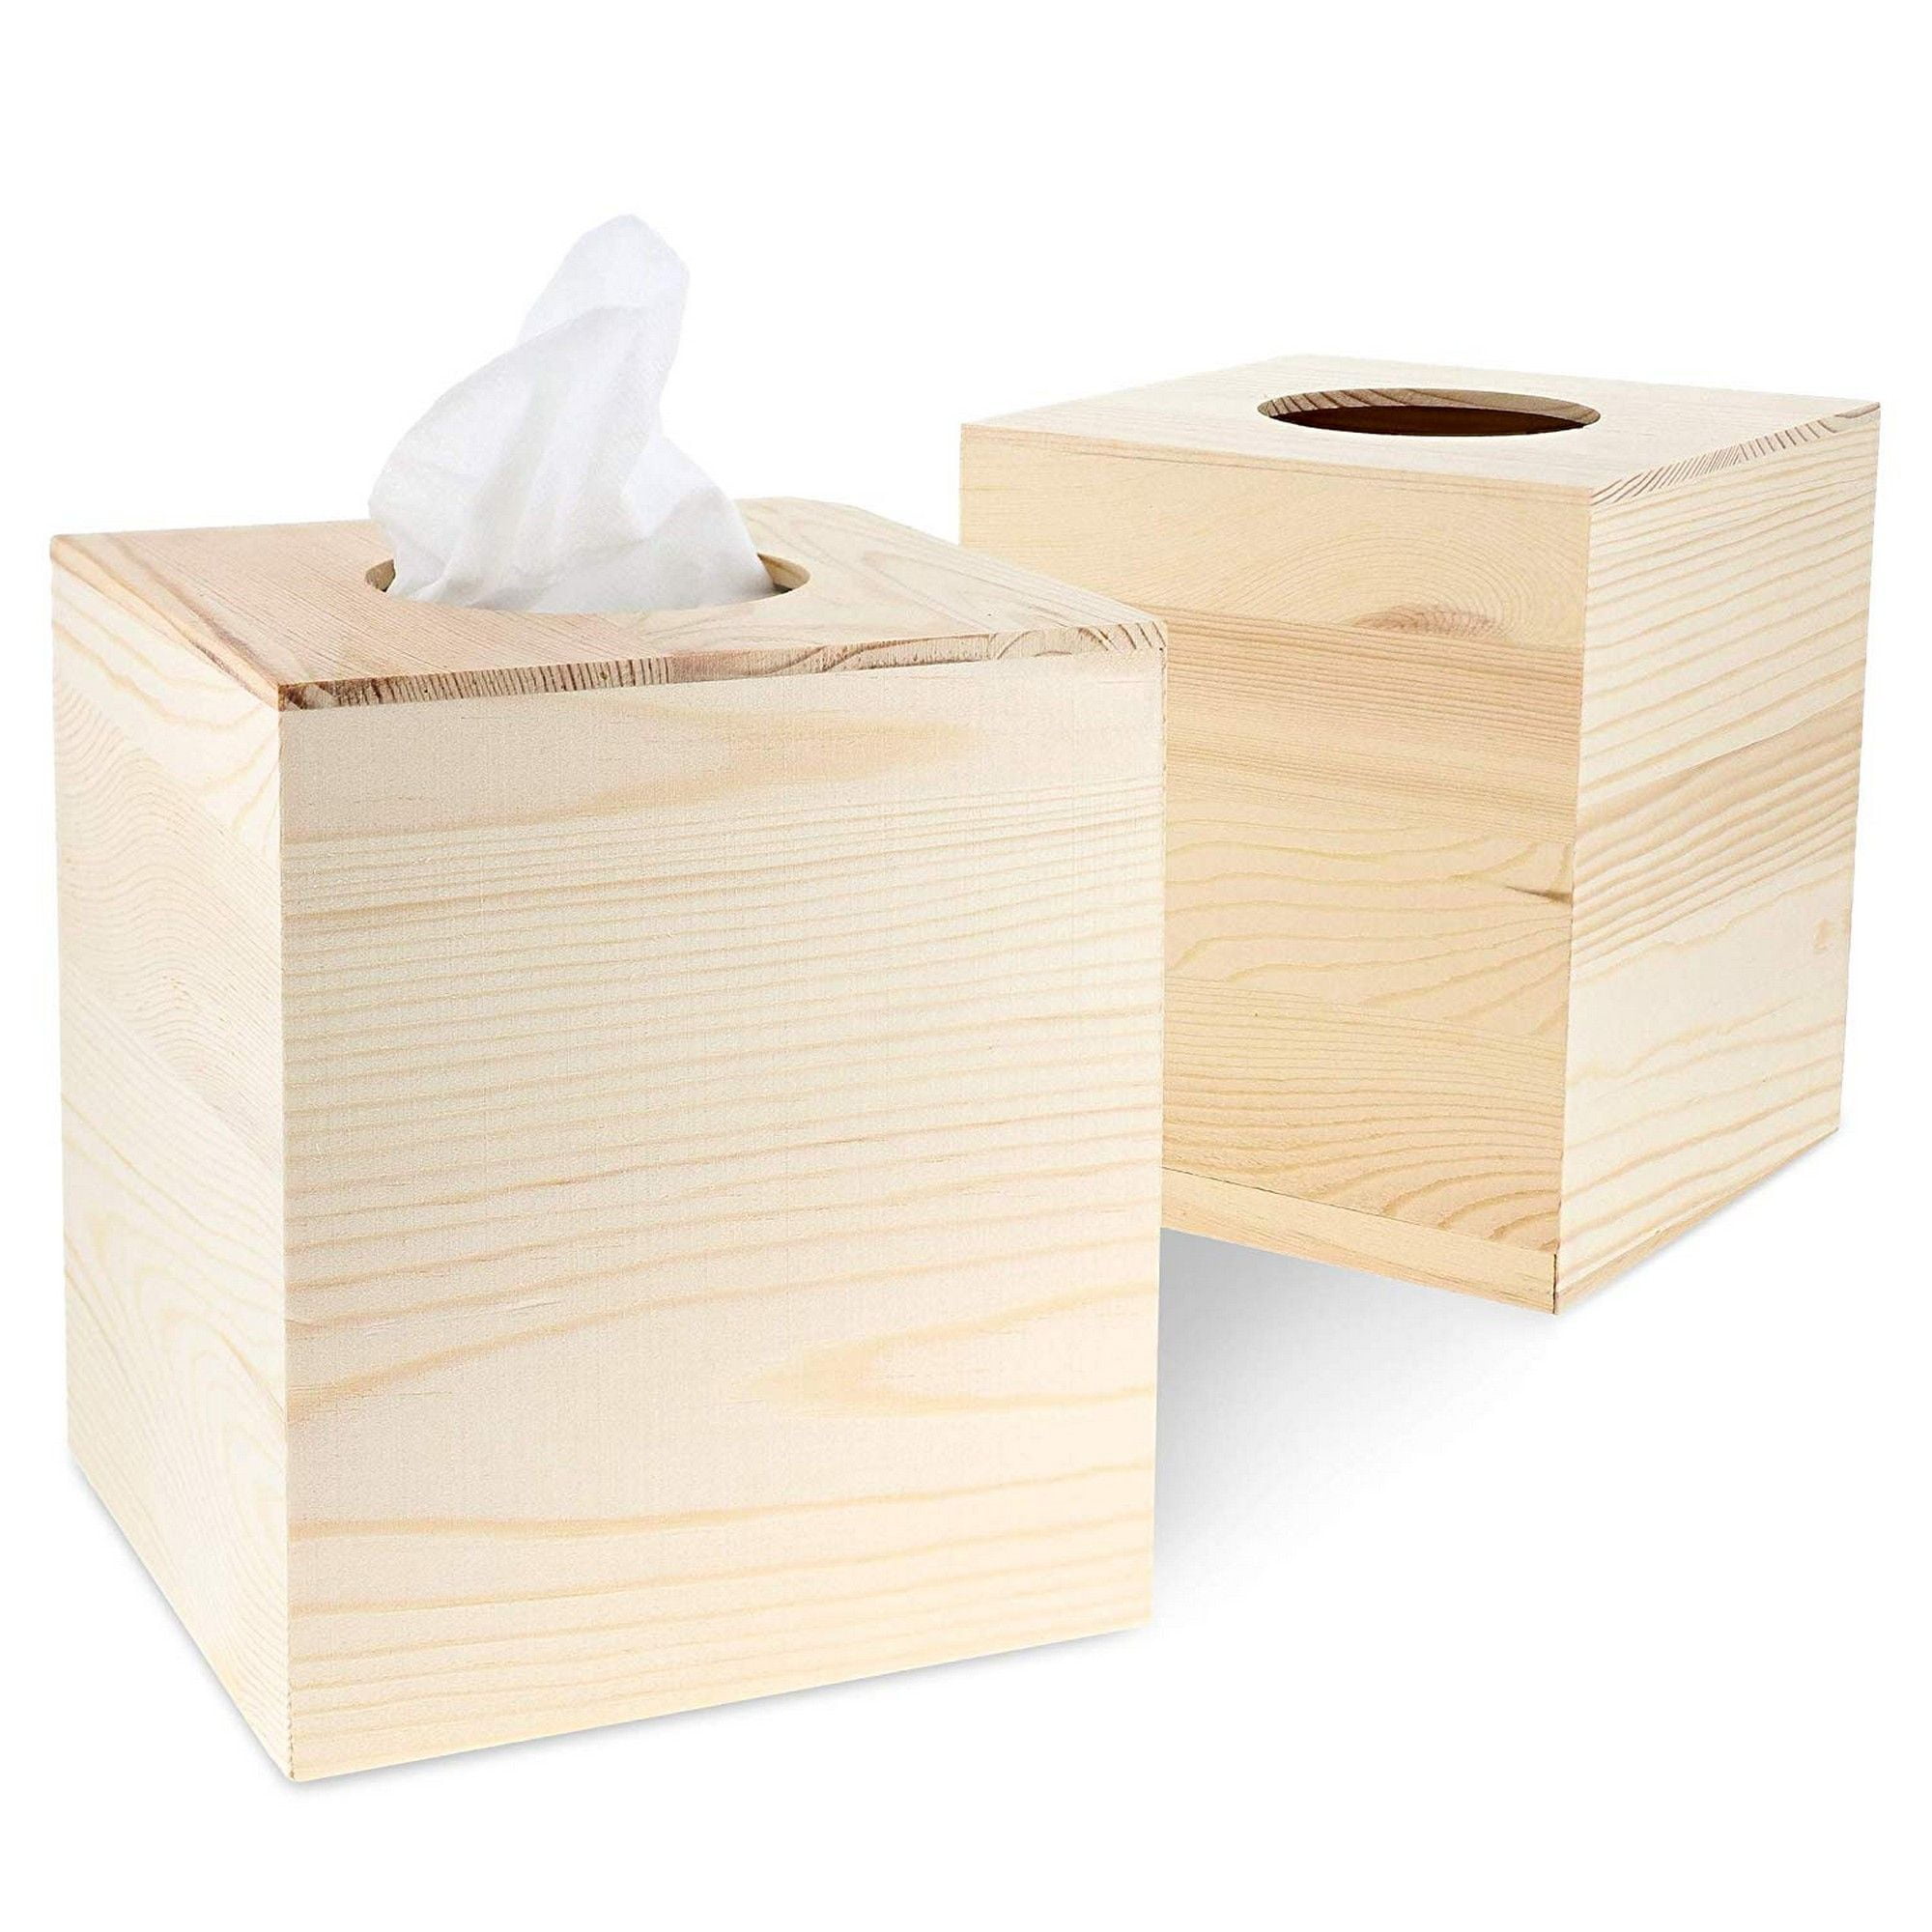 2-Pack Unfinished Natural Wood Tissue Box Cover Holder for 